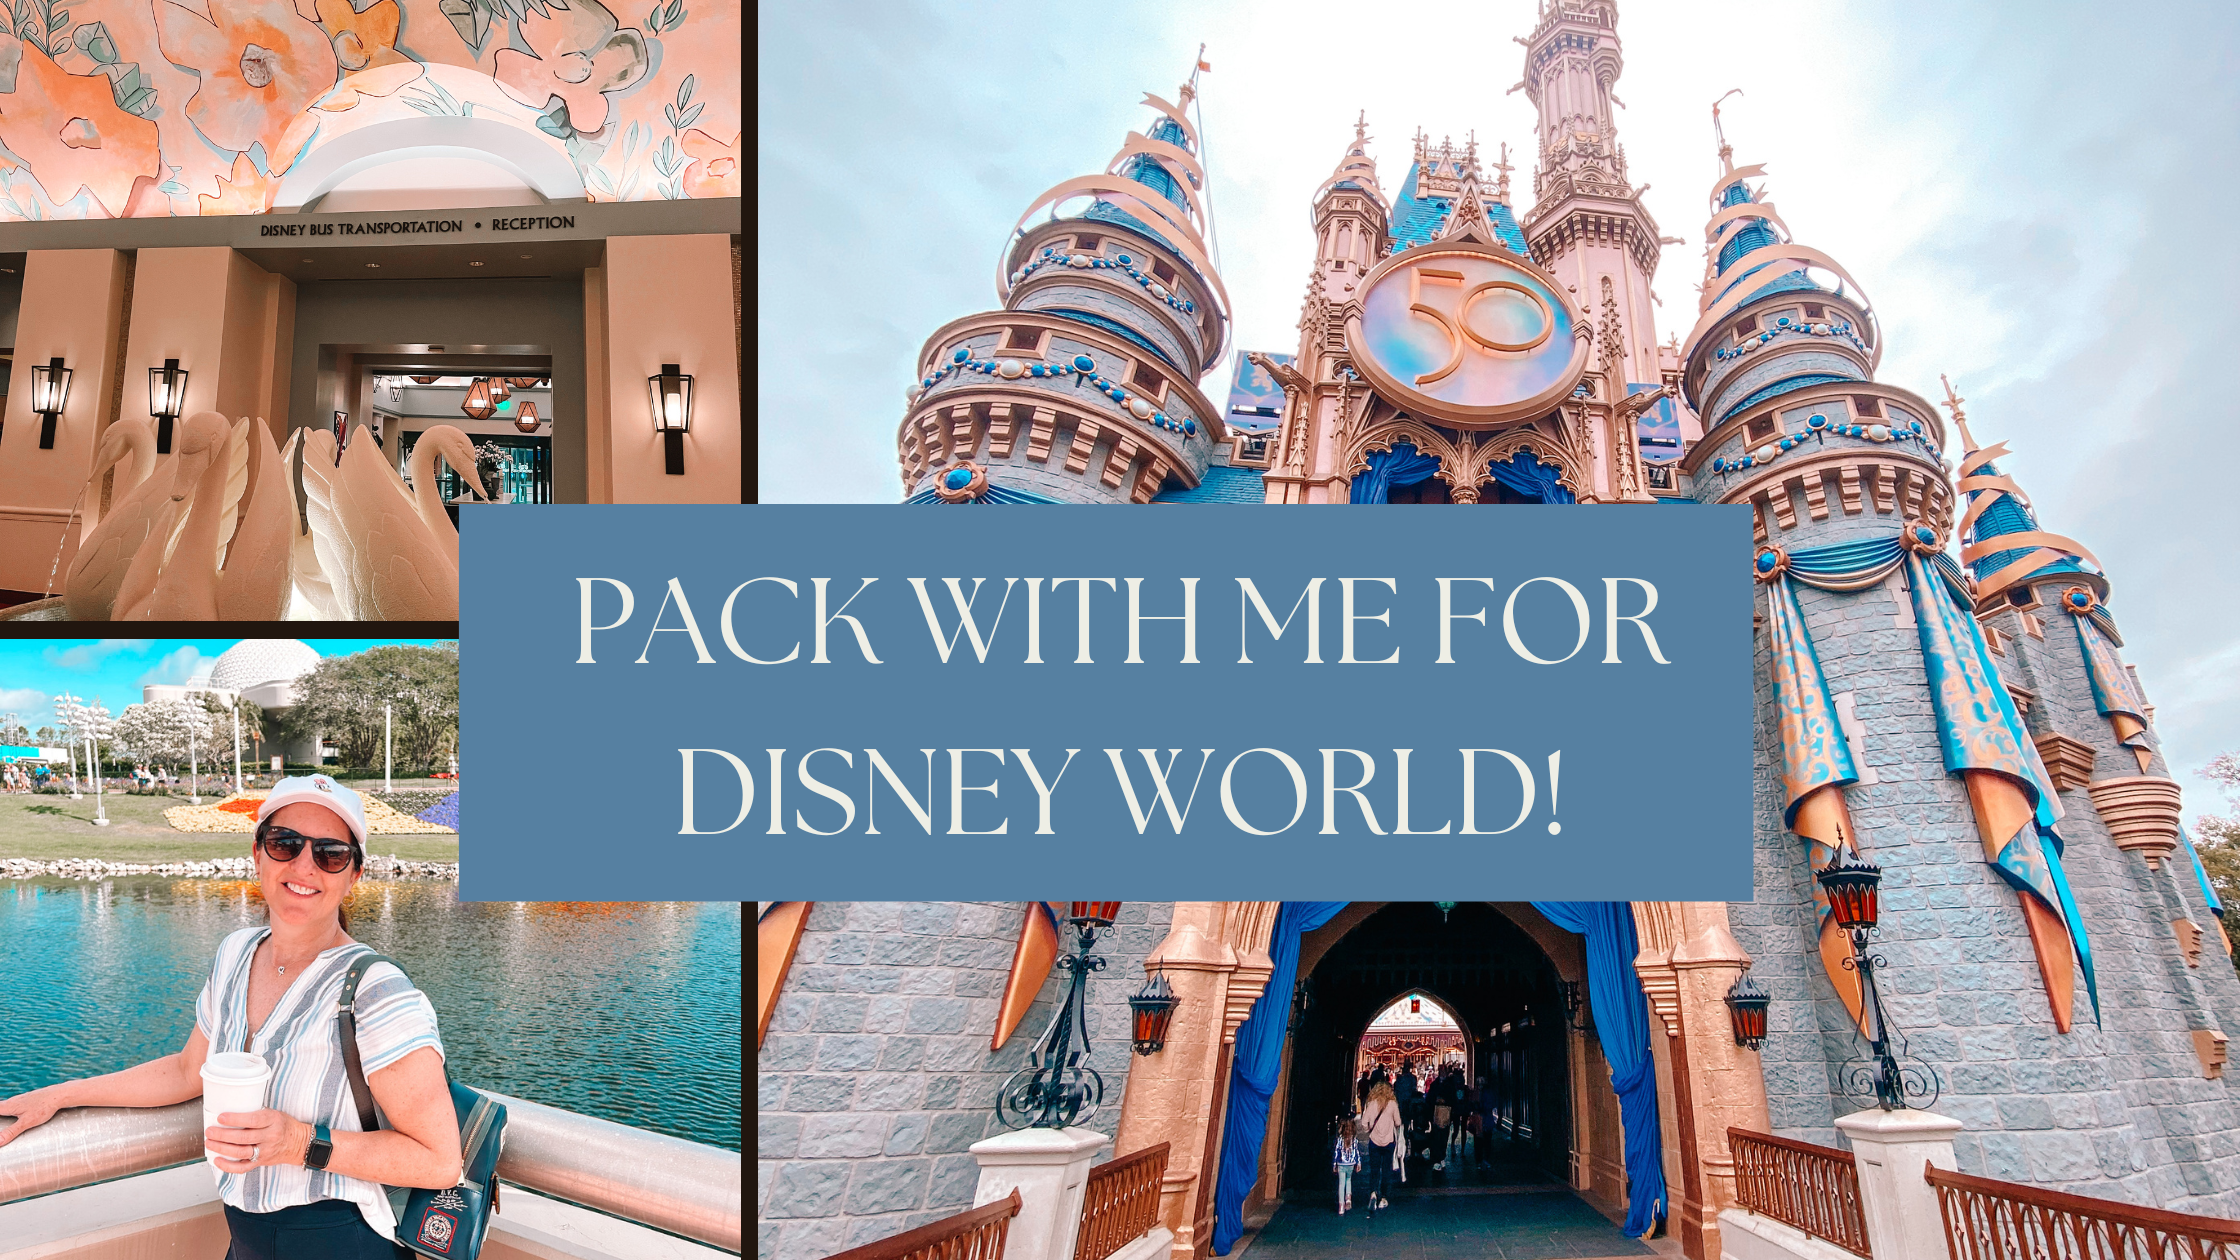 Pack With Me For Disney World!